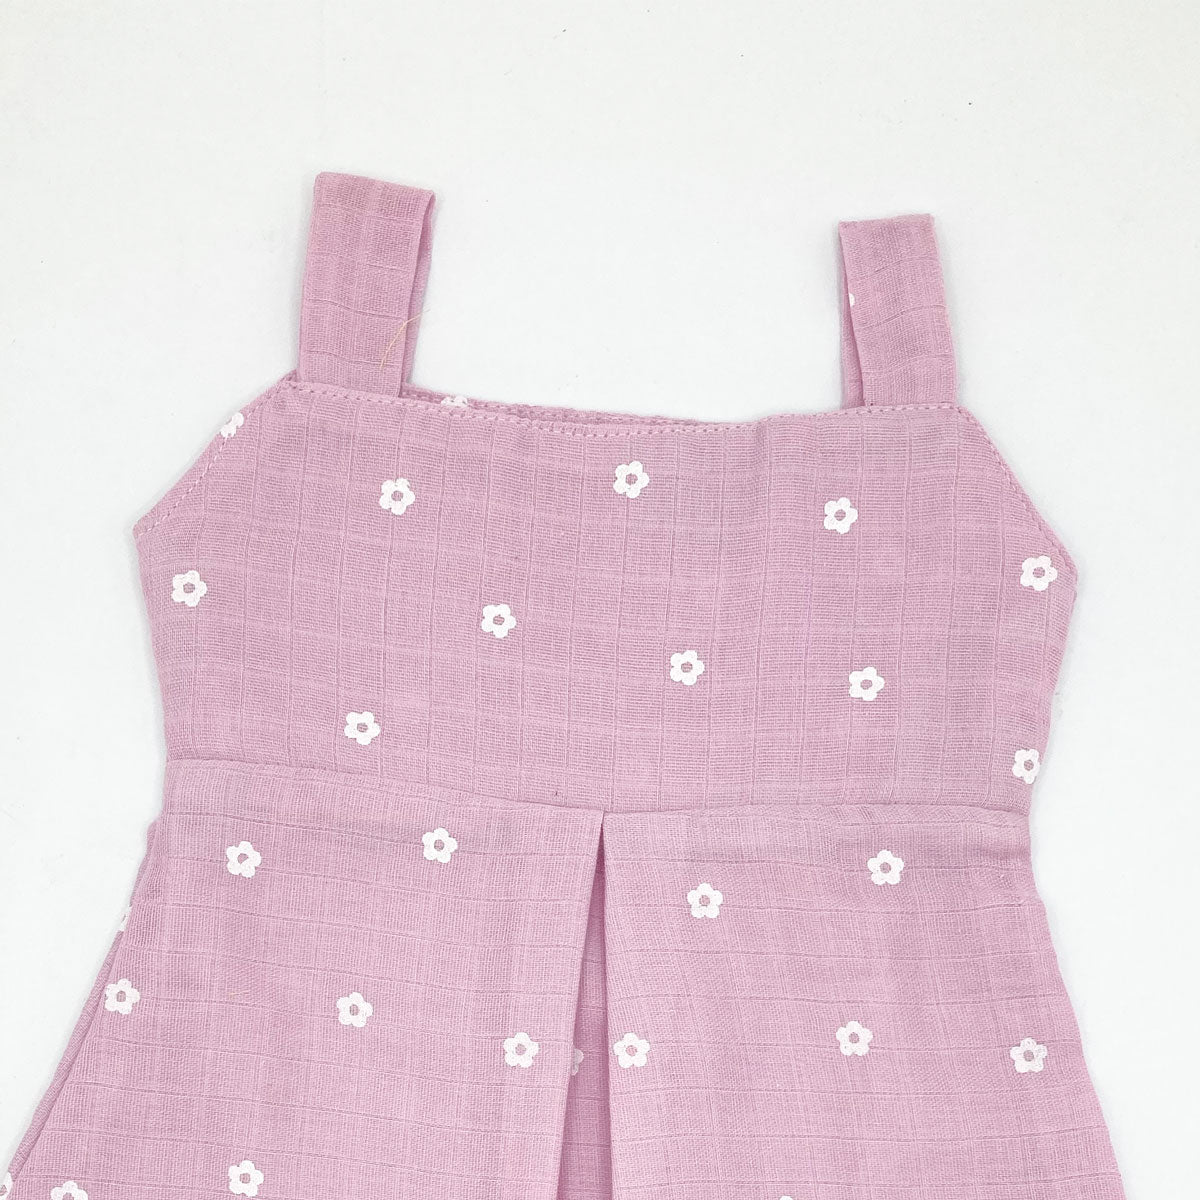 Muslin Frock for Baby Girl -Sleeveless Casual Dress Organic Cotton (Pack of 2)